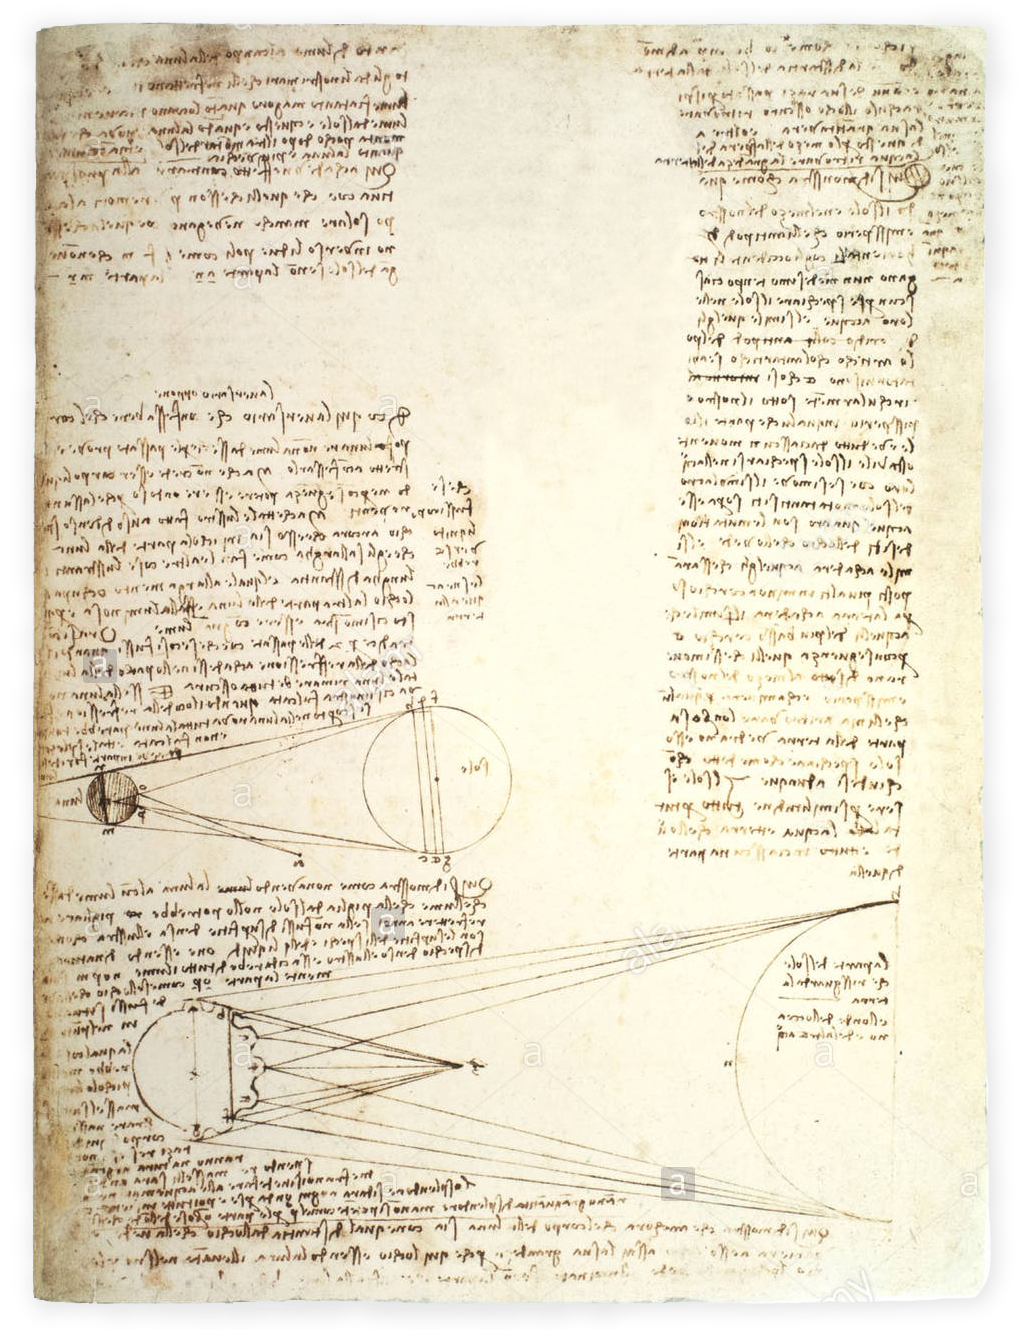 Studies of the Illumination of the Moon by Da Vinci, fol. 1r from Codex Leicester, 1508-1512